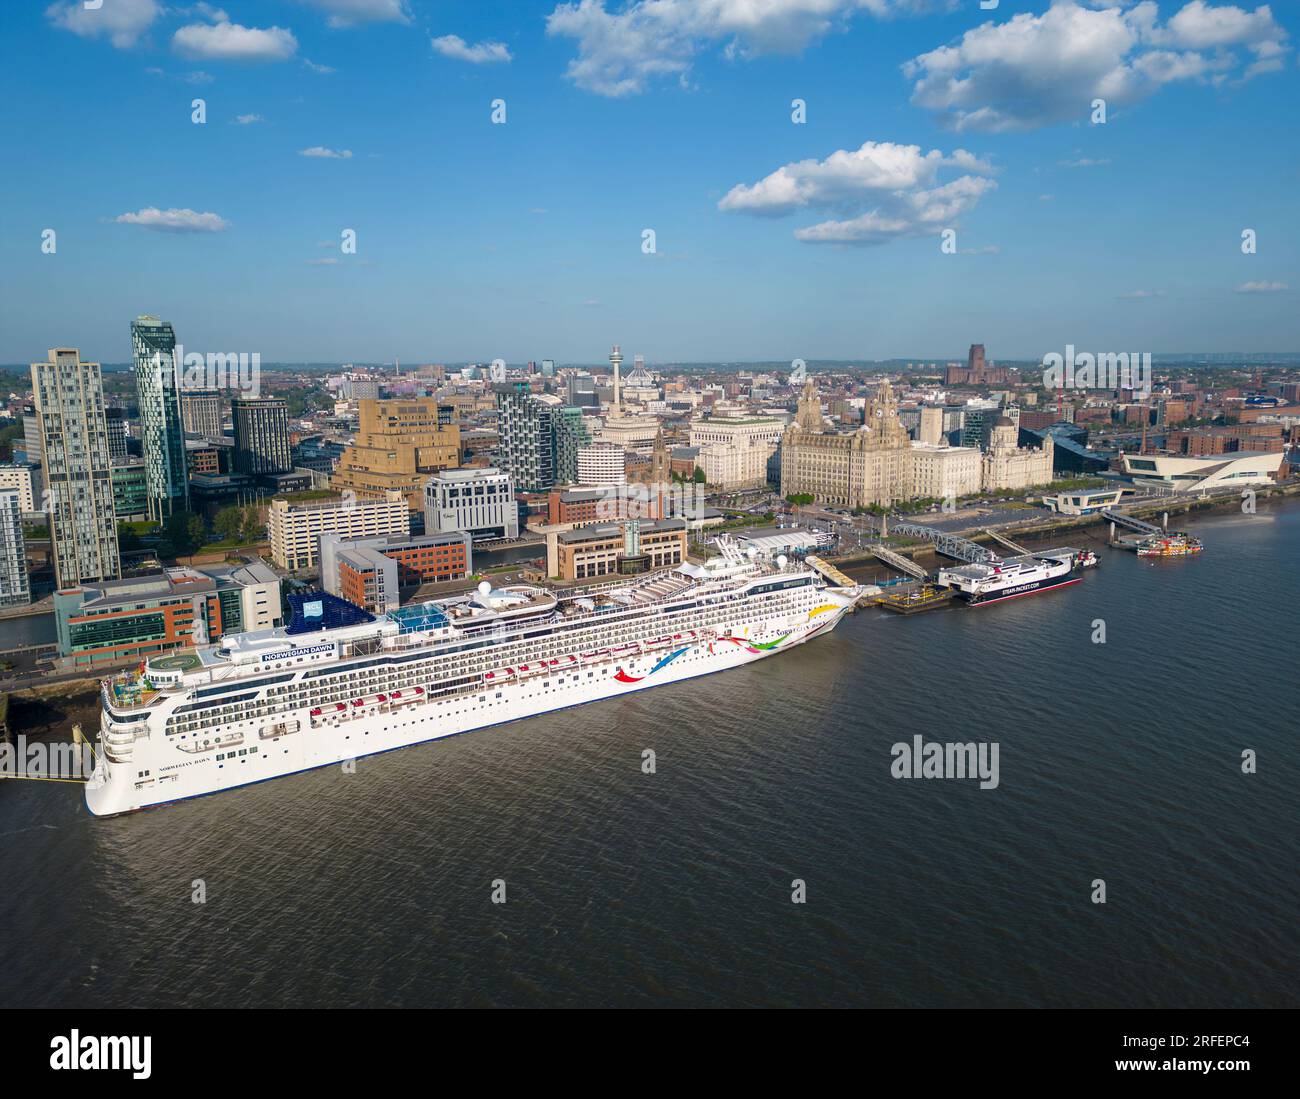 Norwegian Dawn cruise ship docked at the Pier Head, Liverpool, England Stock Photo